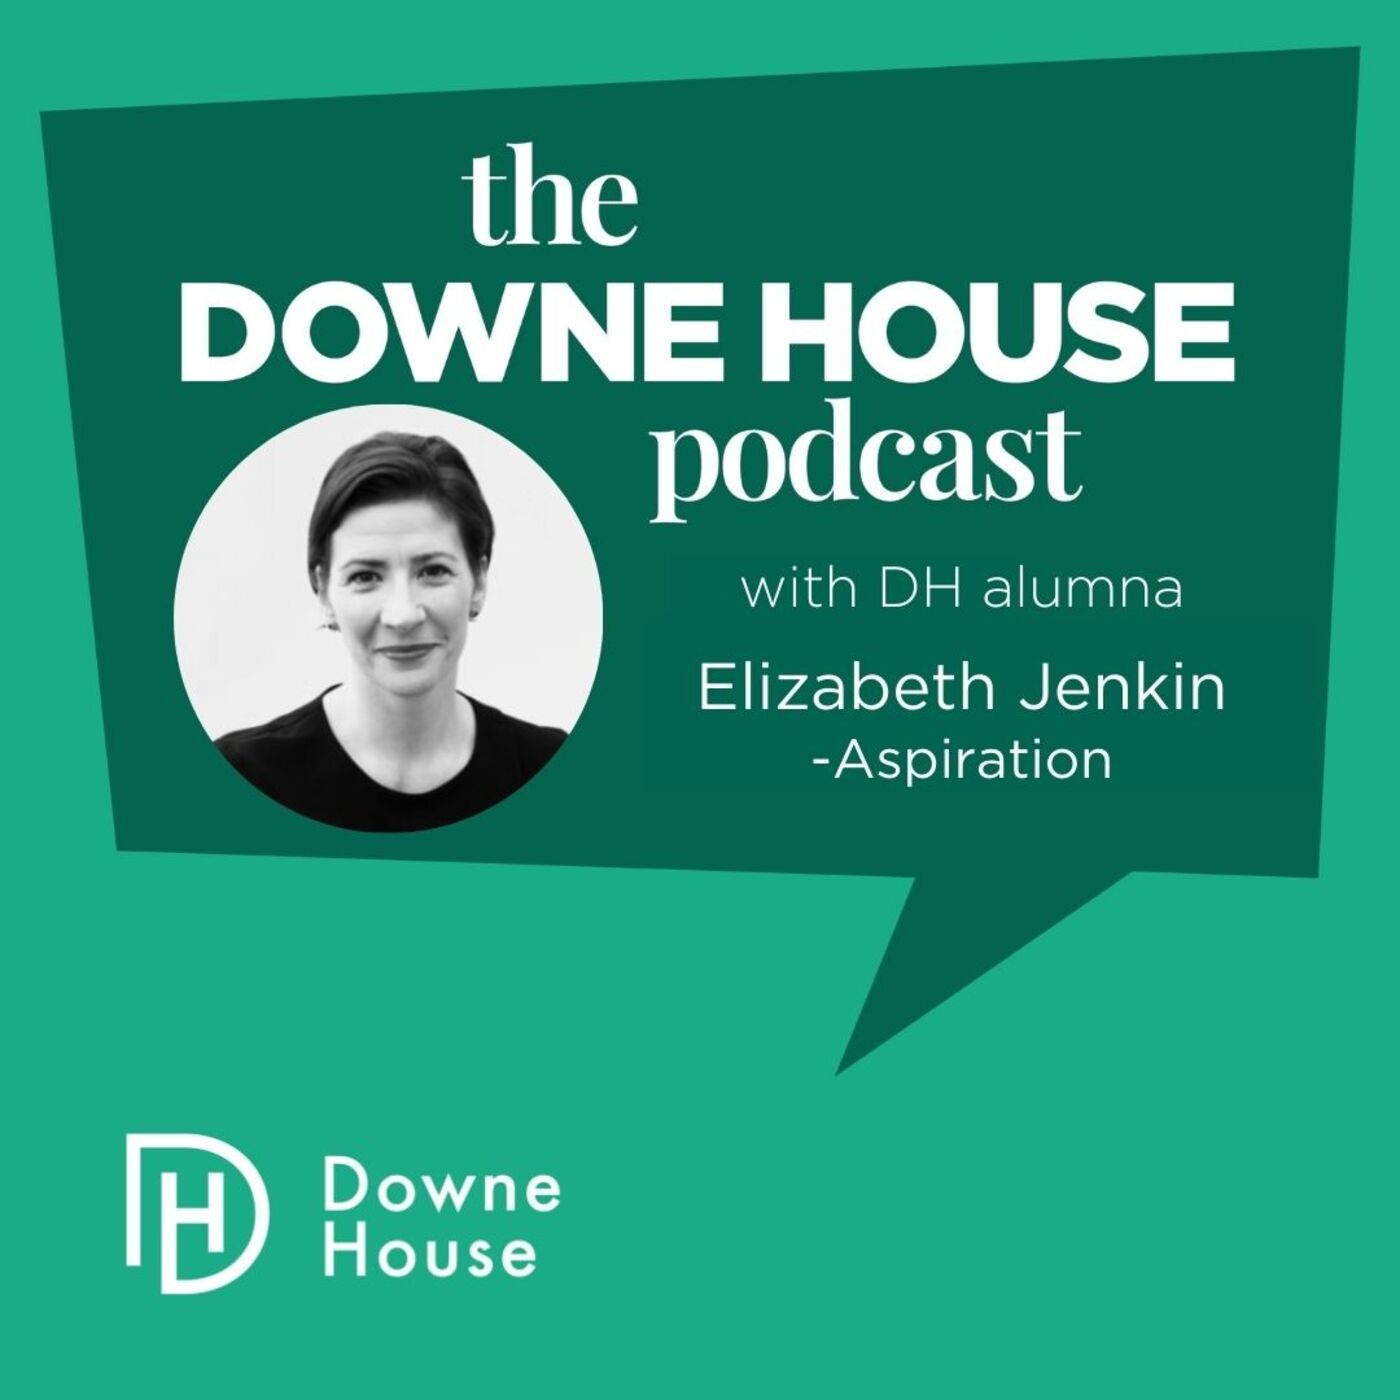 Artwork for podcast The Downe House Podcast